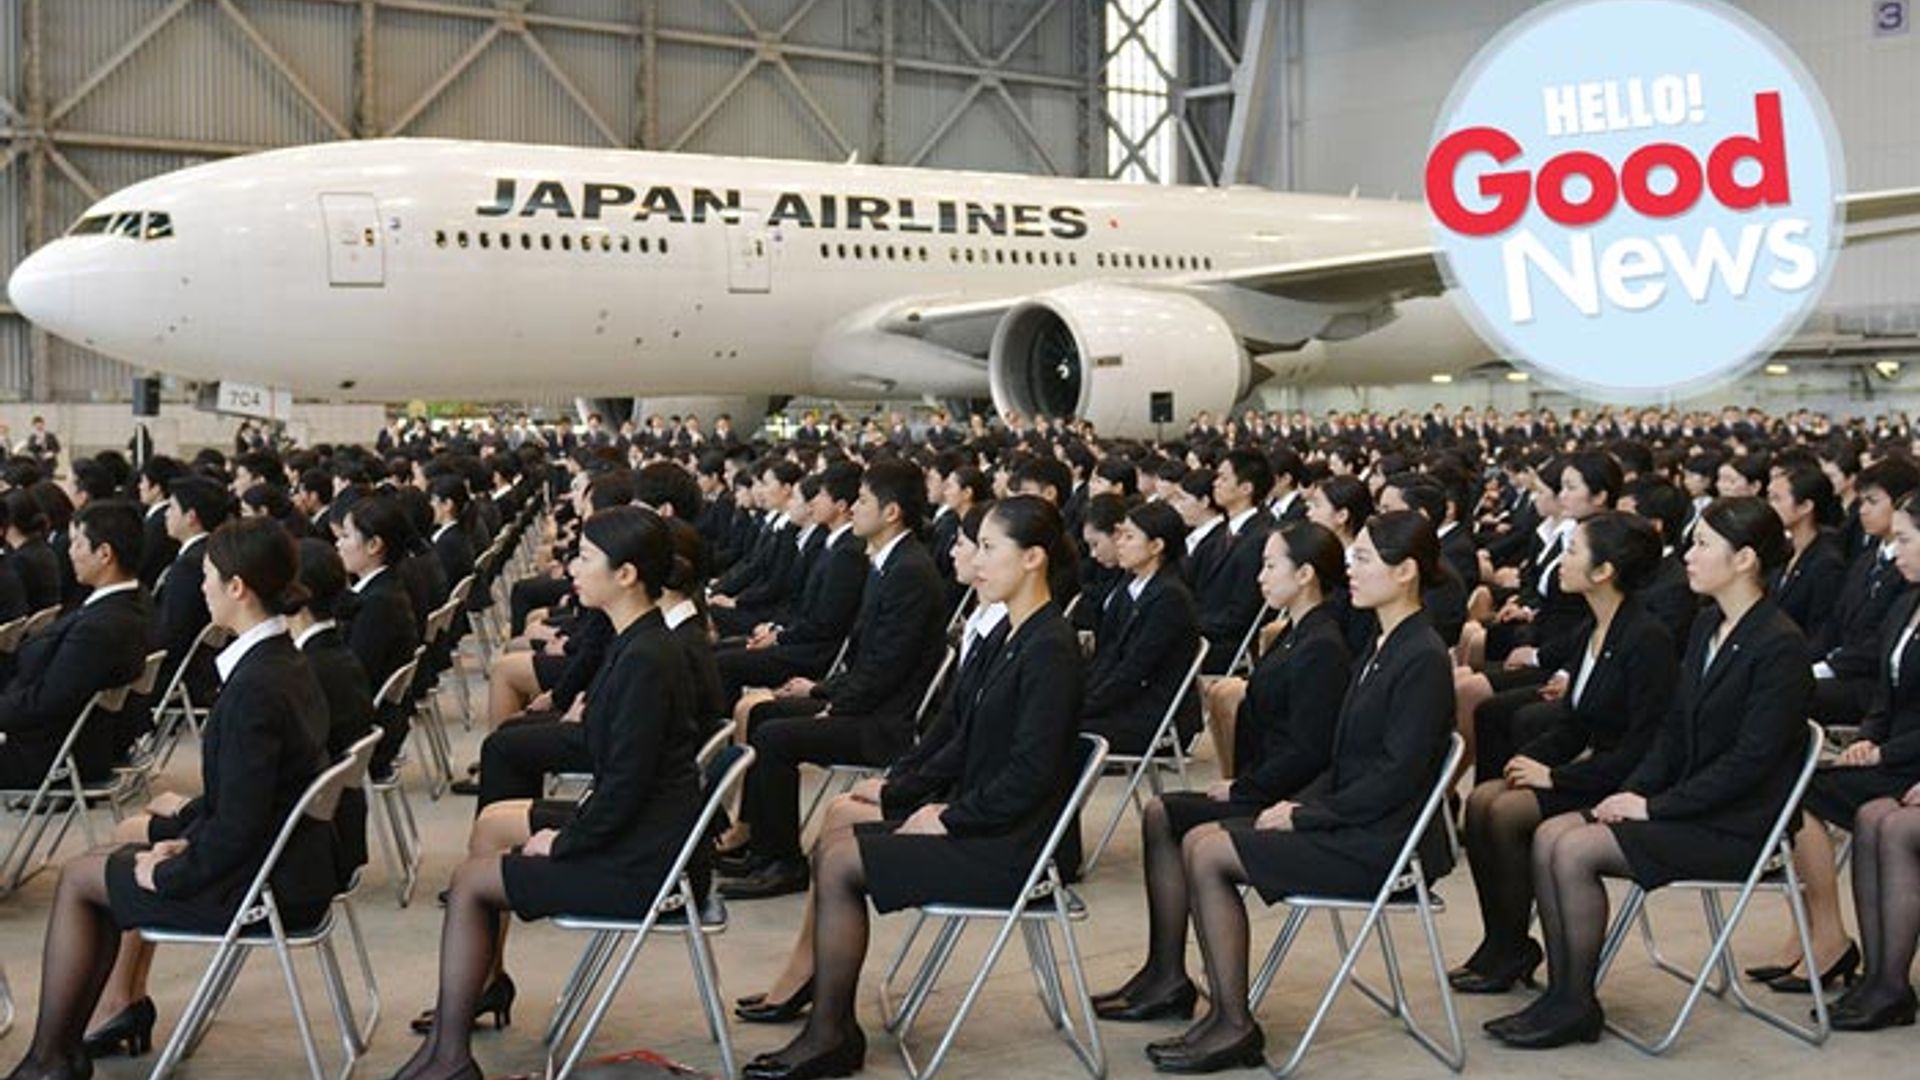 Japan Airlines ditches compulsory high heels and skirts for female crew after national #KuToo campaign